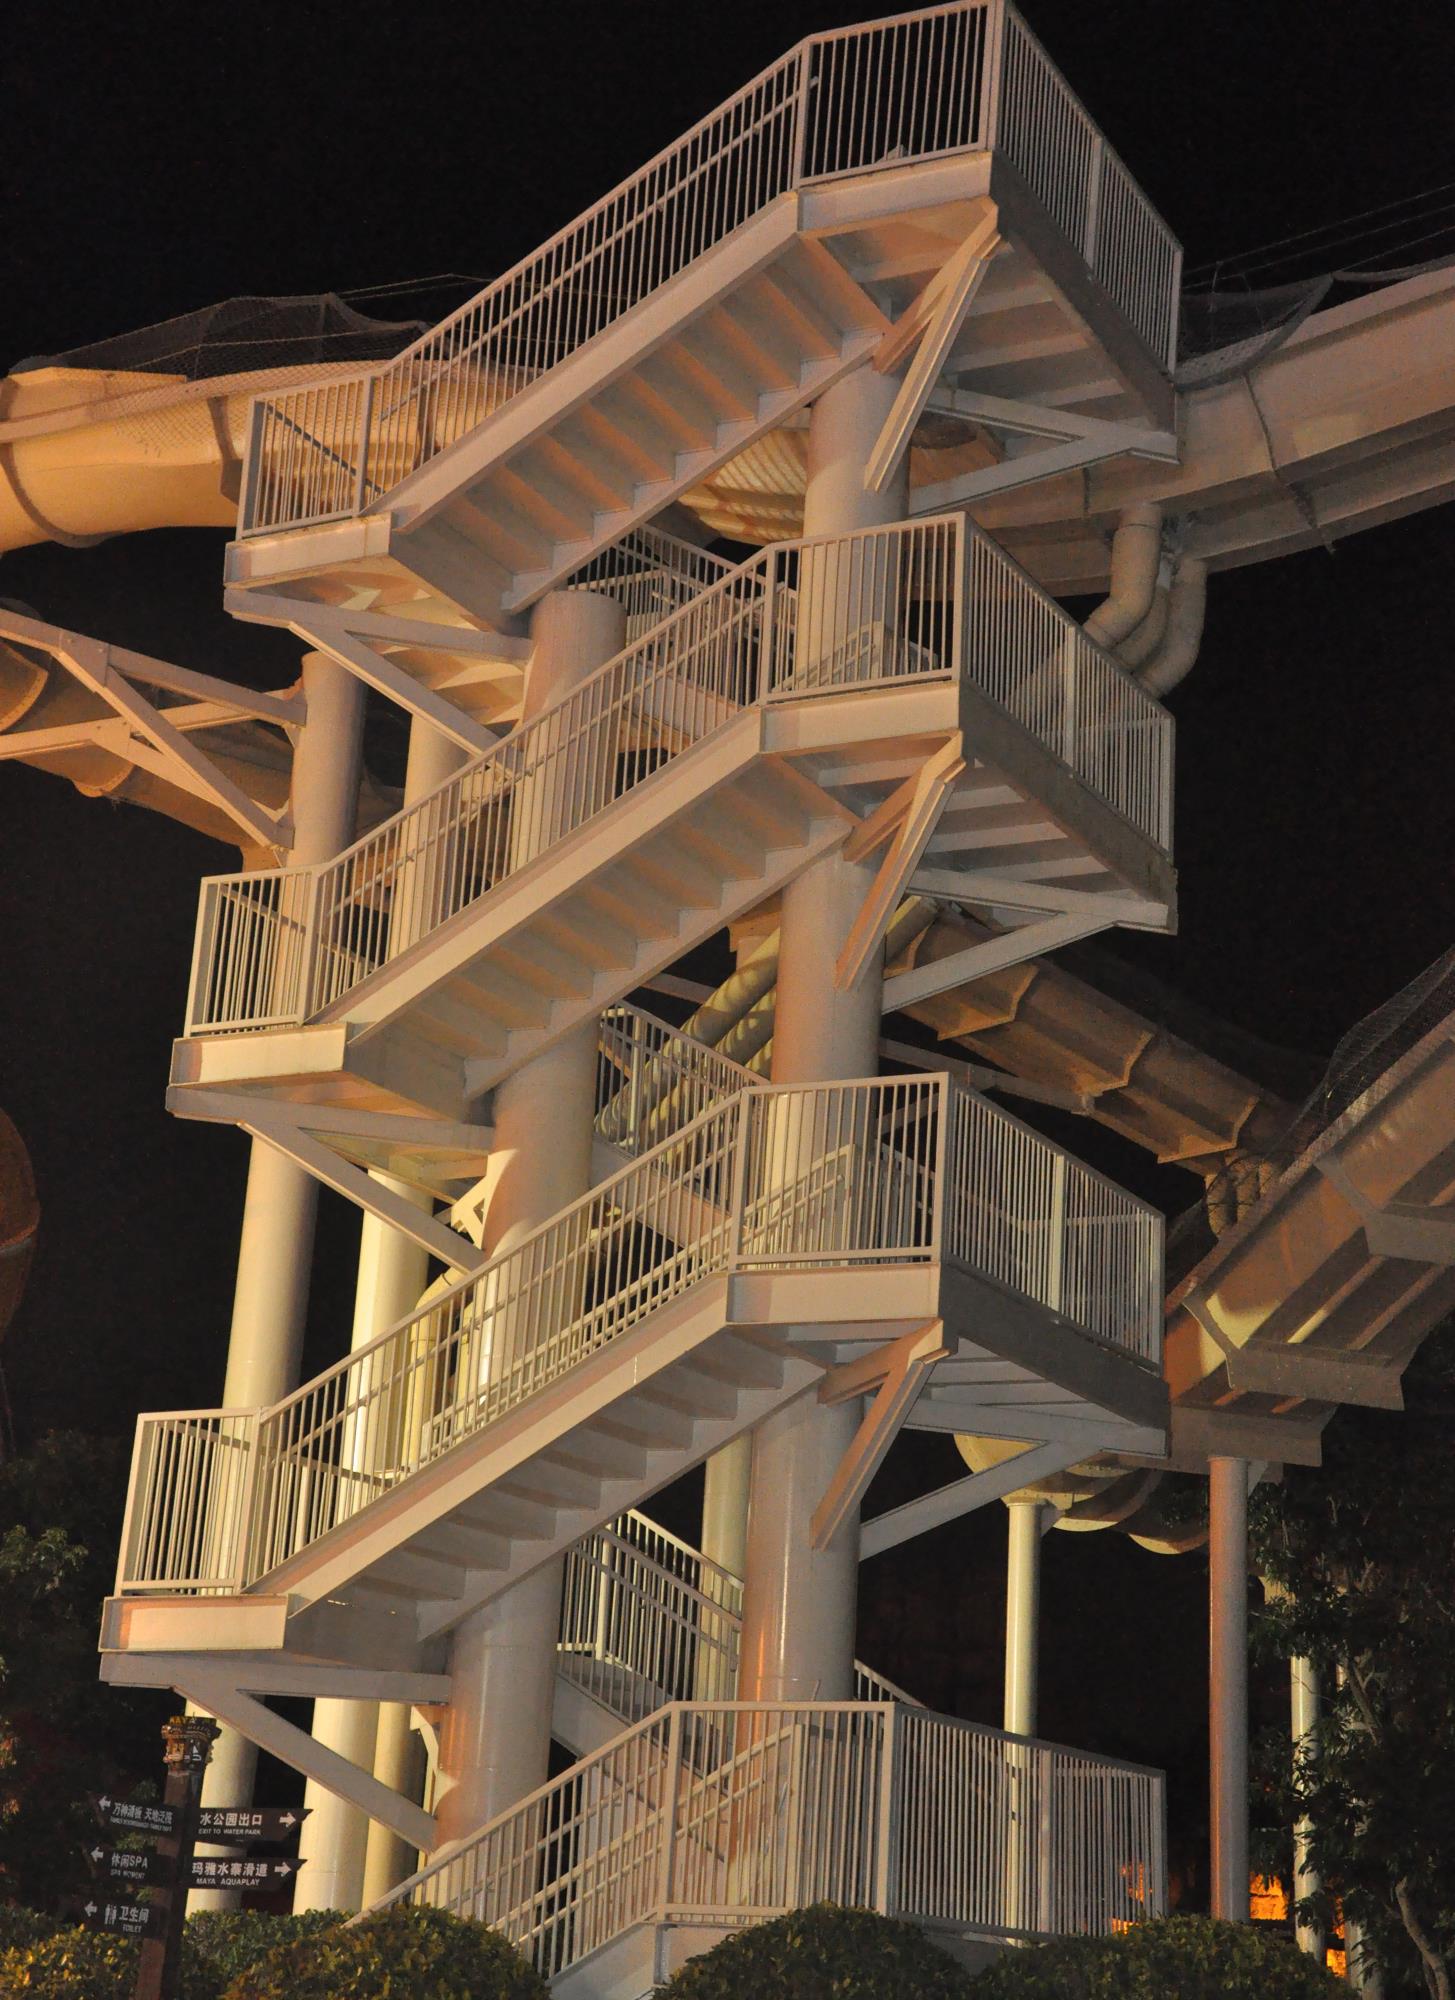 Steel stairs of amusement park